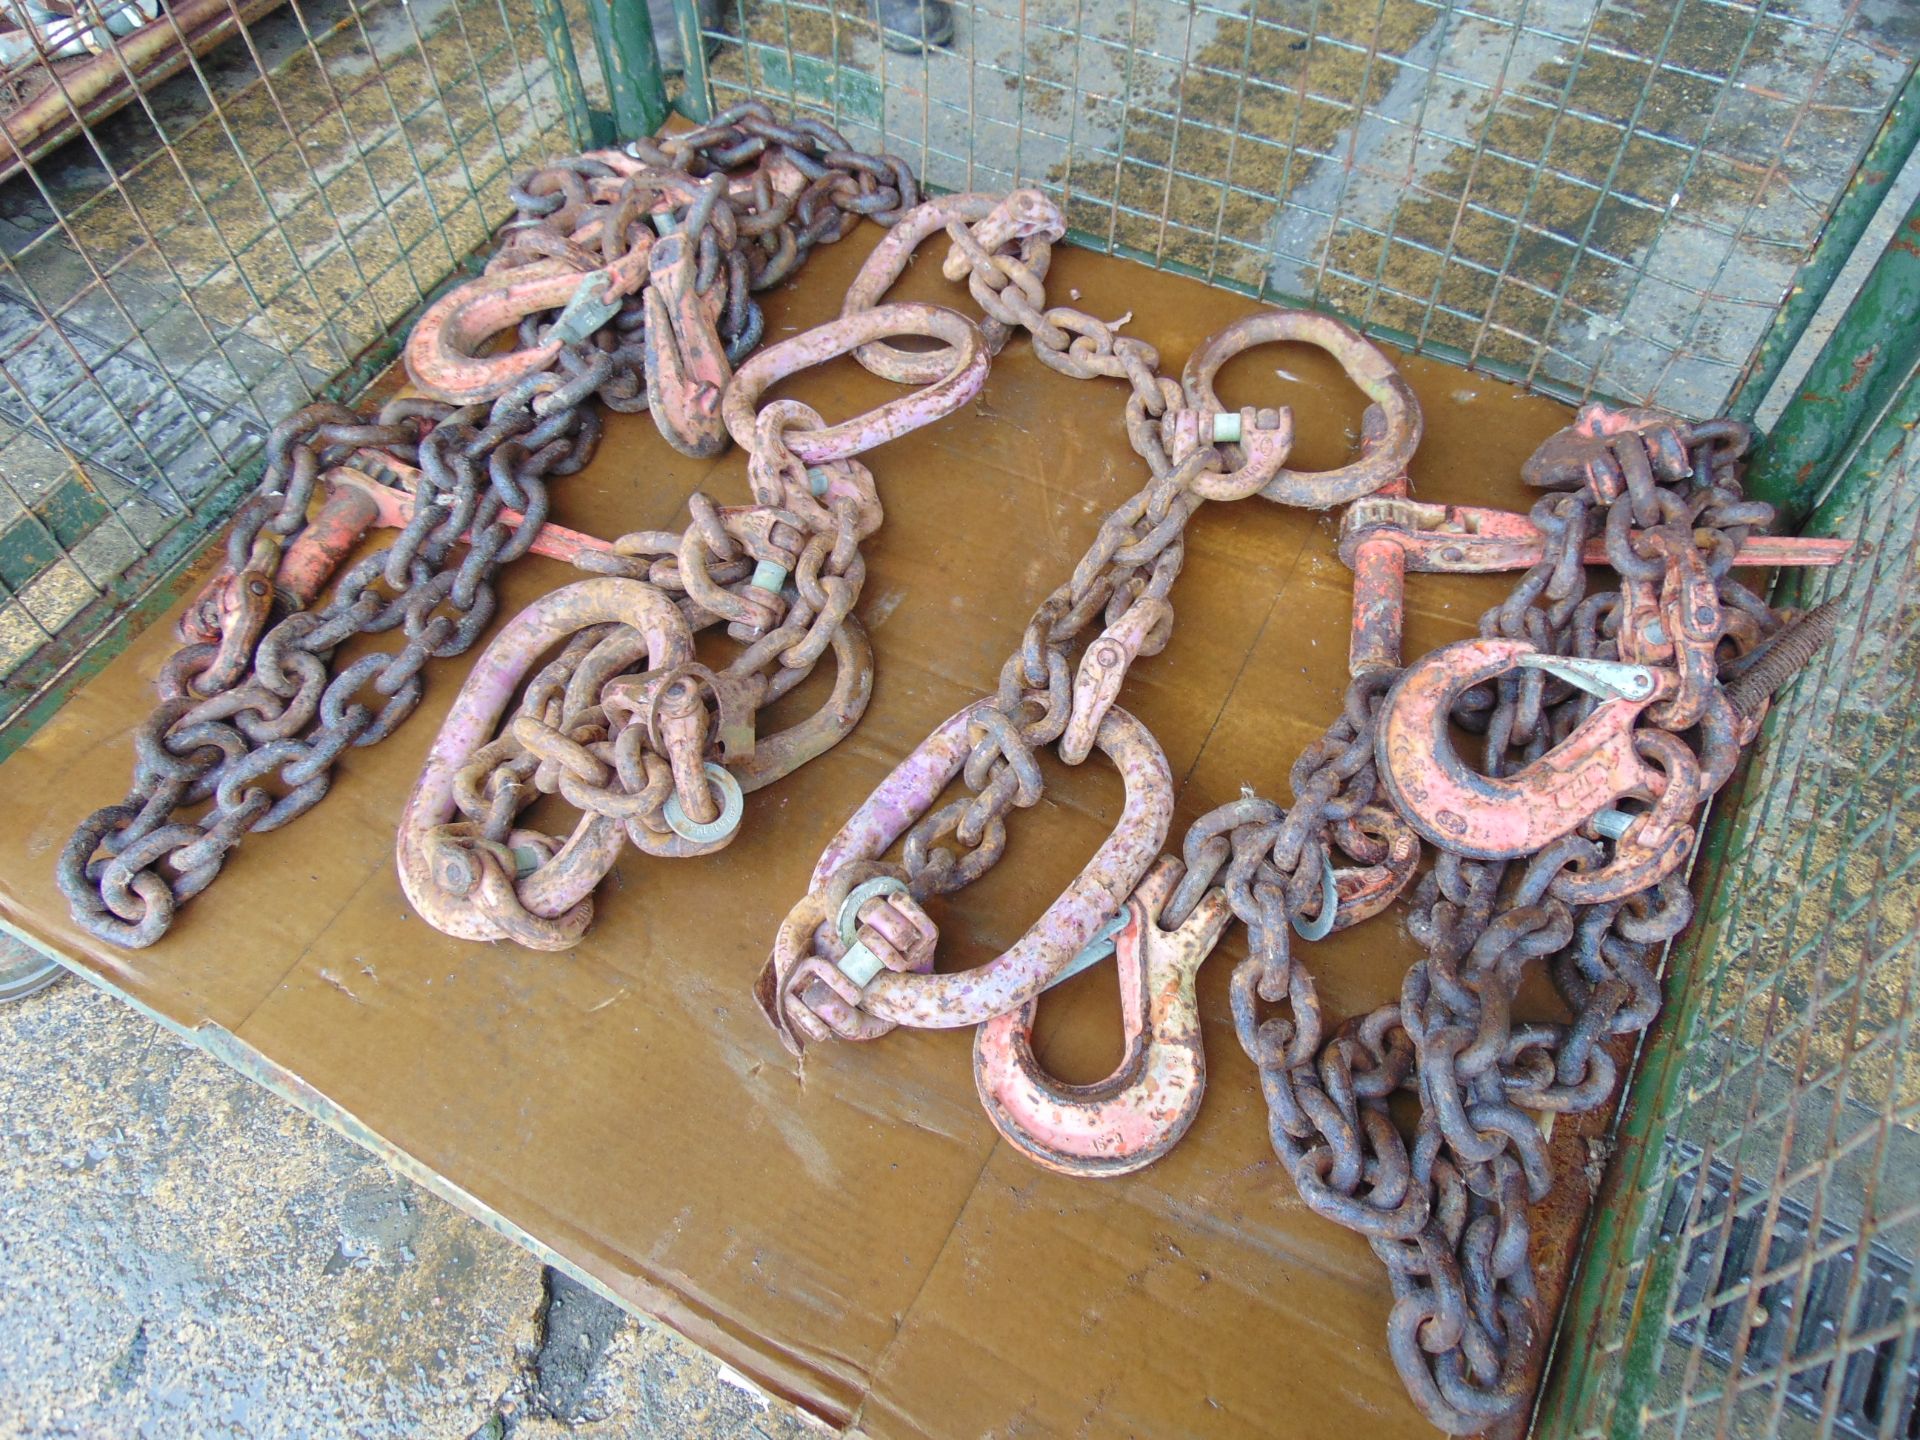 Heavy Duty Load Binders, Lifting Chains etc - Image 3 of 4